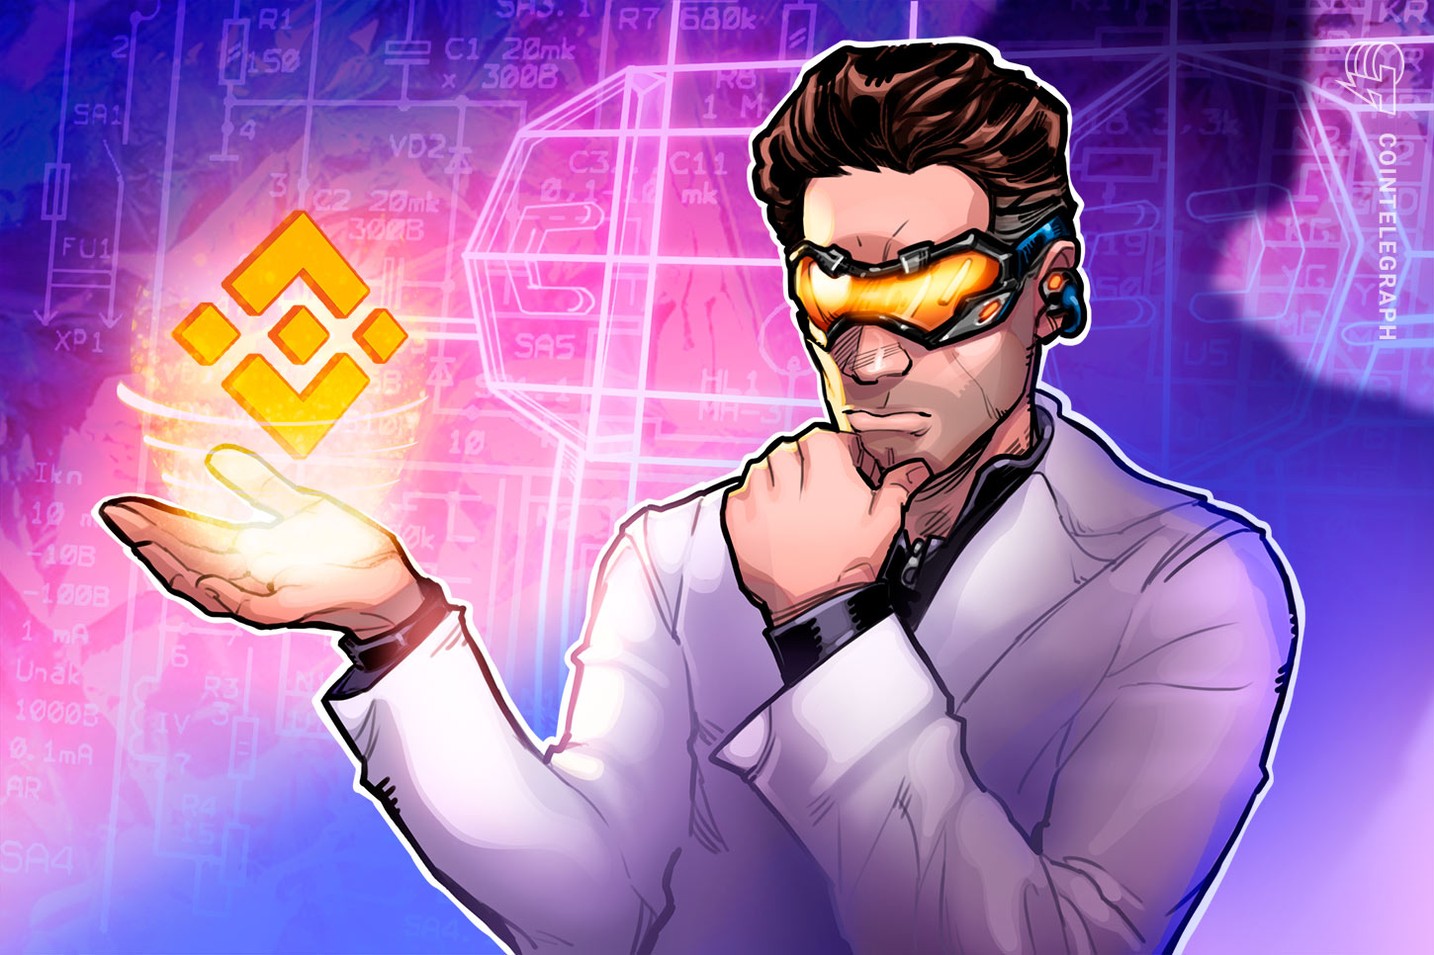 Binance denies fund mismanagement allegations, calls it ‘conspiracy theory’